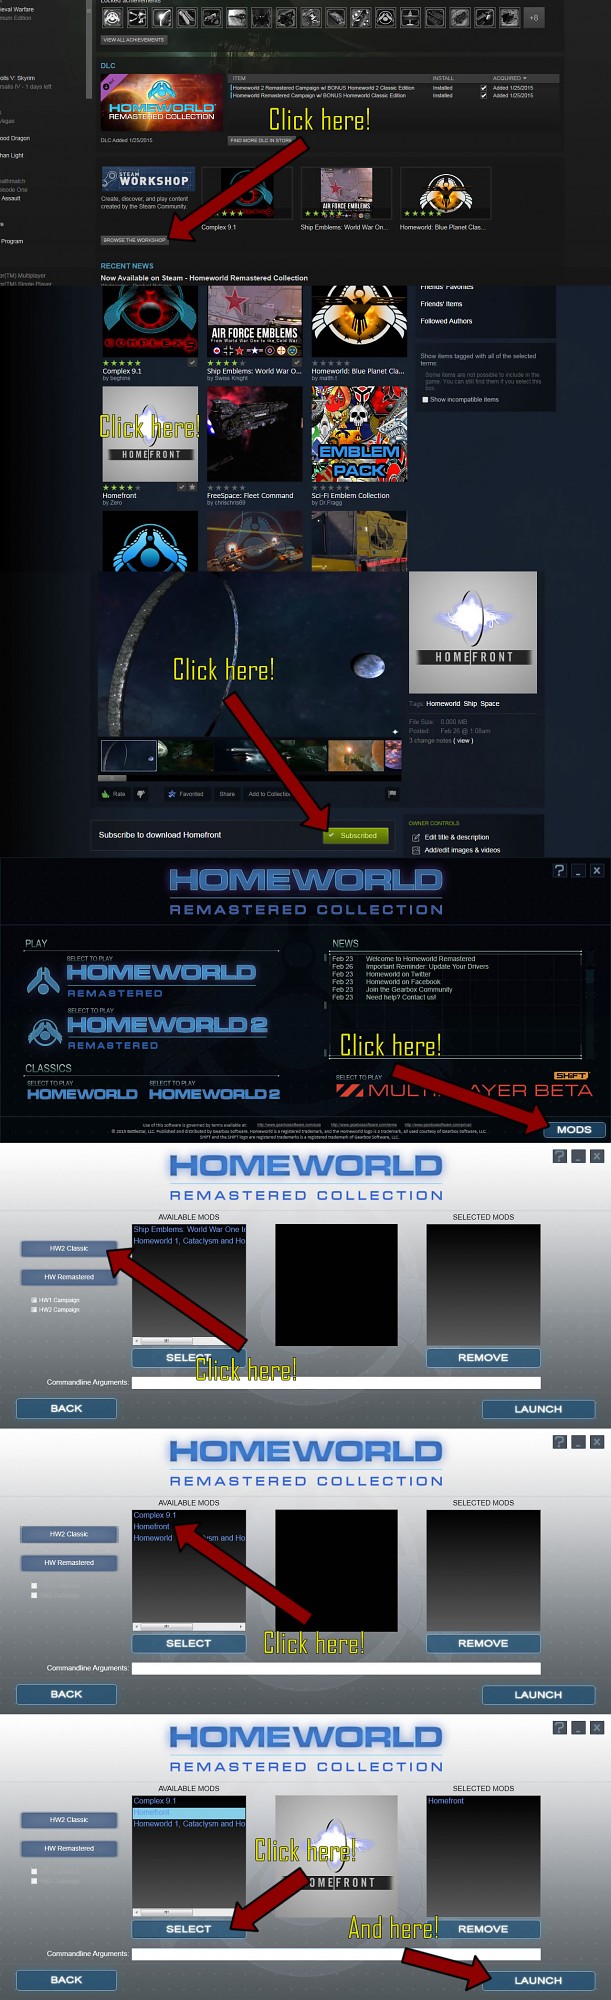 how to download a mod from steam workshop